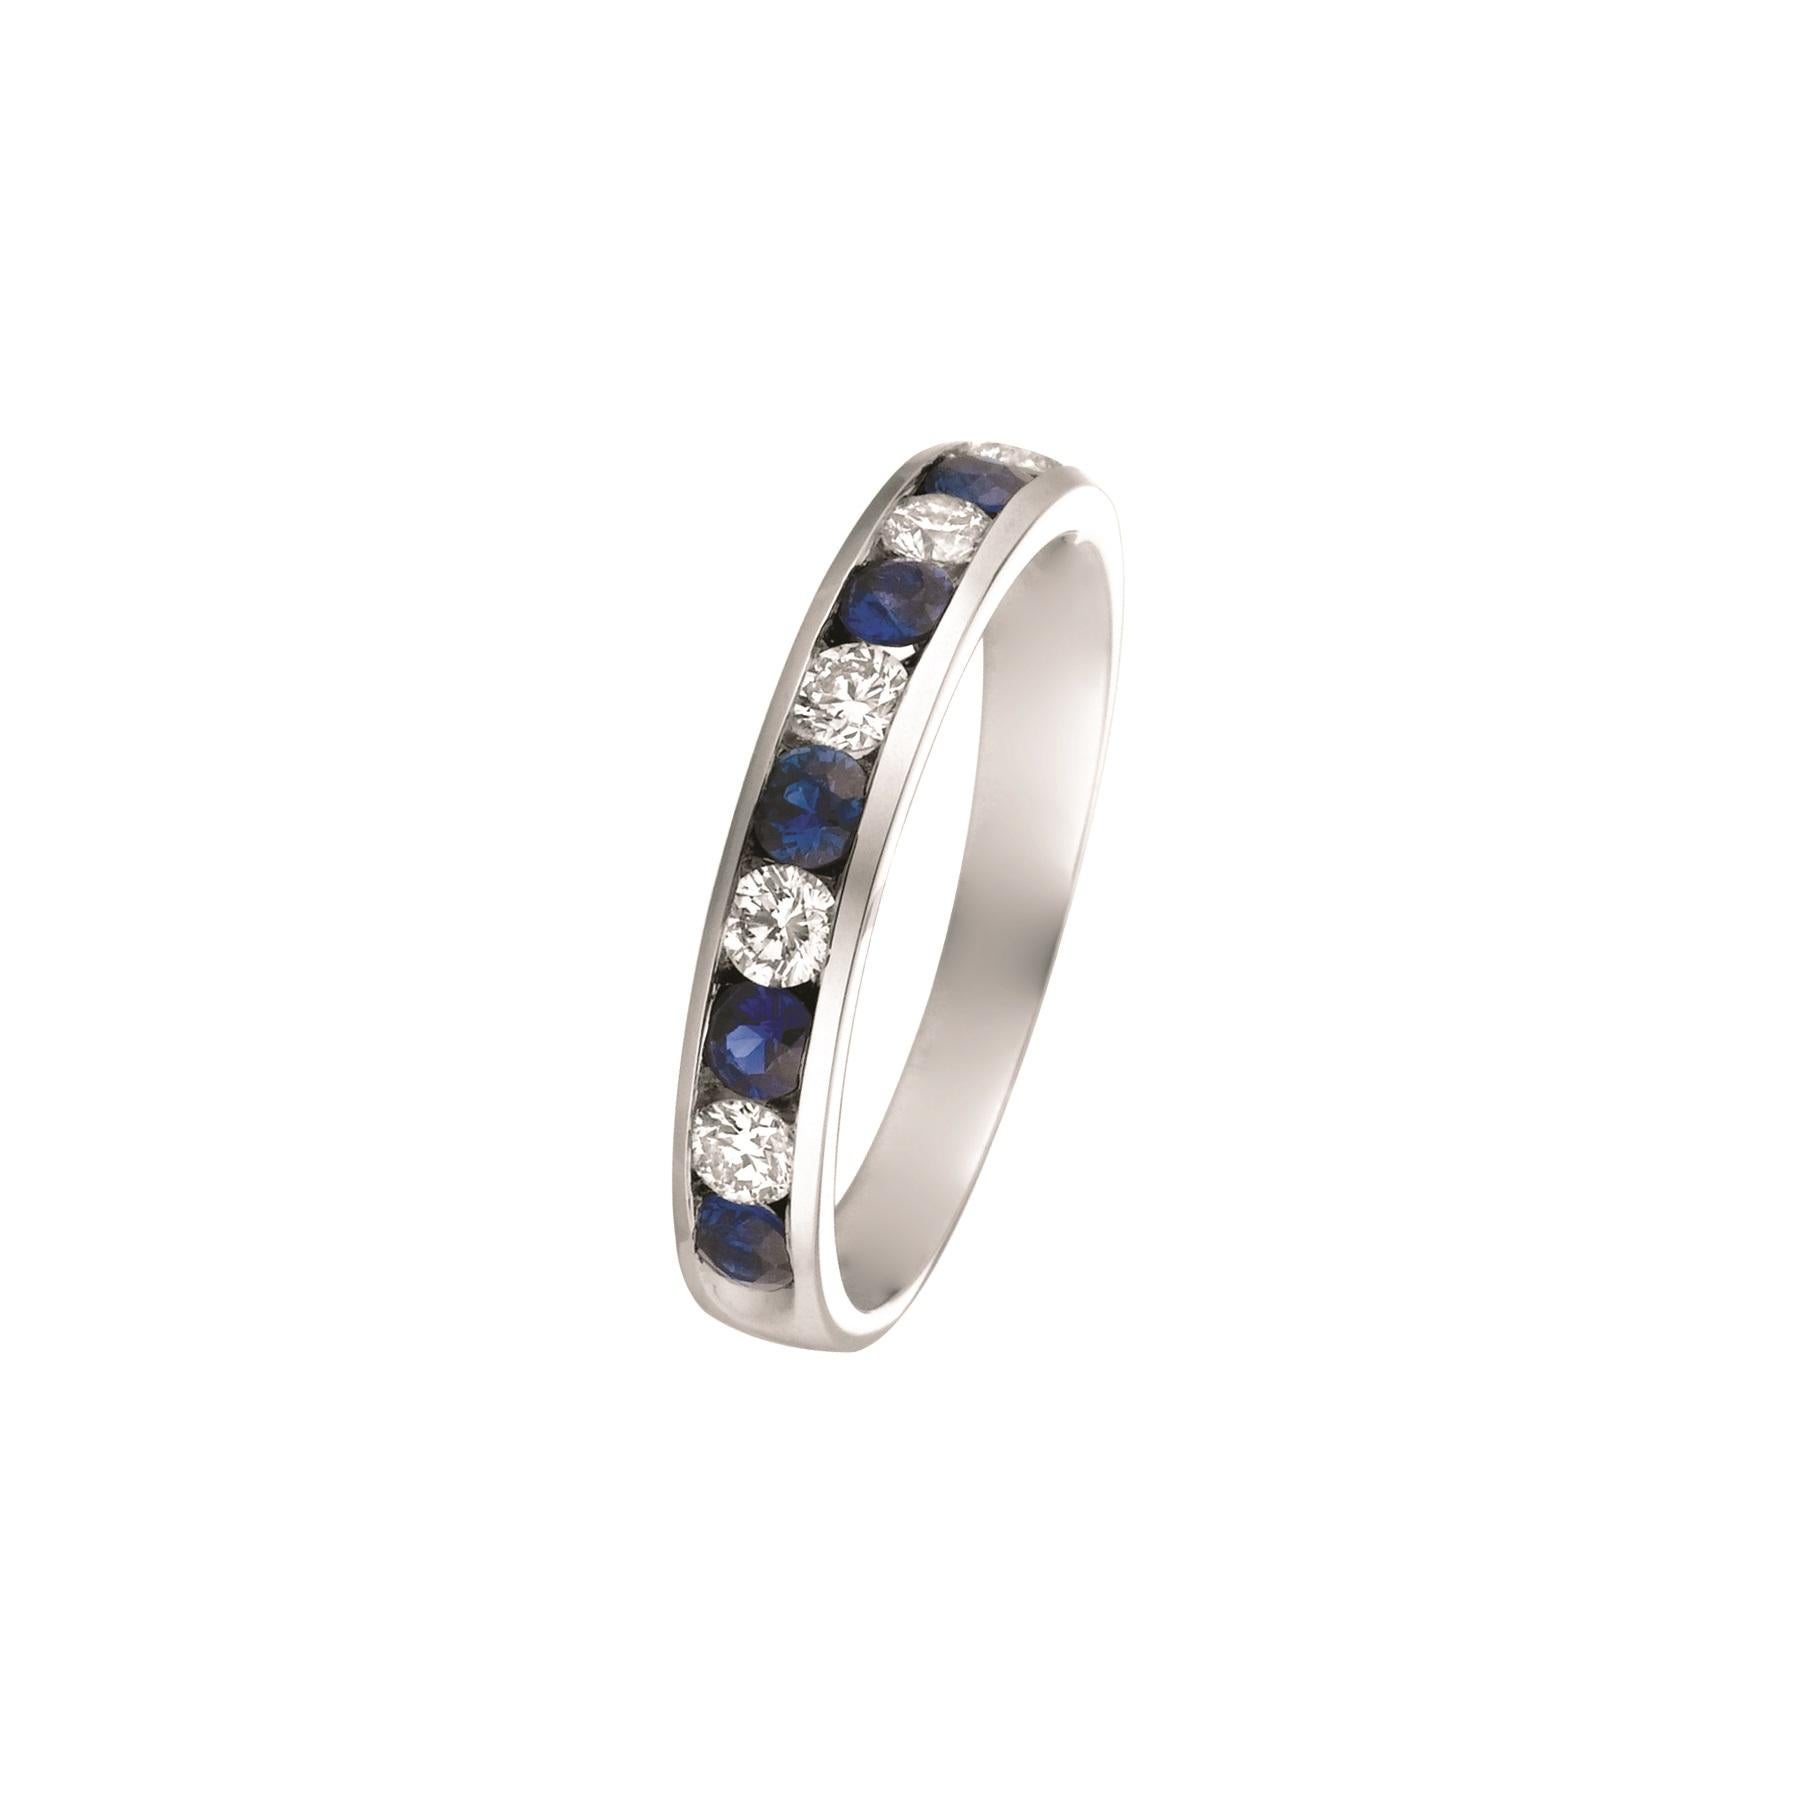 1.10 Carat Natural Diamond and Sapphire Ring G SI 14K White Gold

100% Natural Diamonds and Sapphires
1.10CTW
G-H
SI
14K White Gold Channel set, 2.50 grams
3.5 mm in width
Size 7
5 diamonds - 0.37ct, 6 Sapphires -0.73ct

R7173WDS

ALL OUR ITEMS ARE